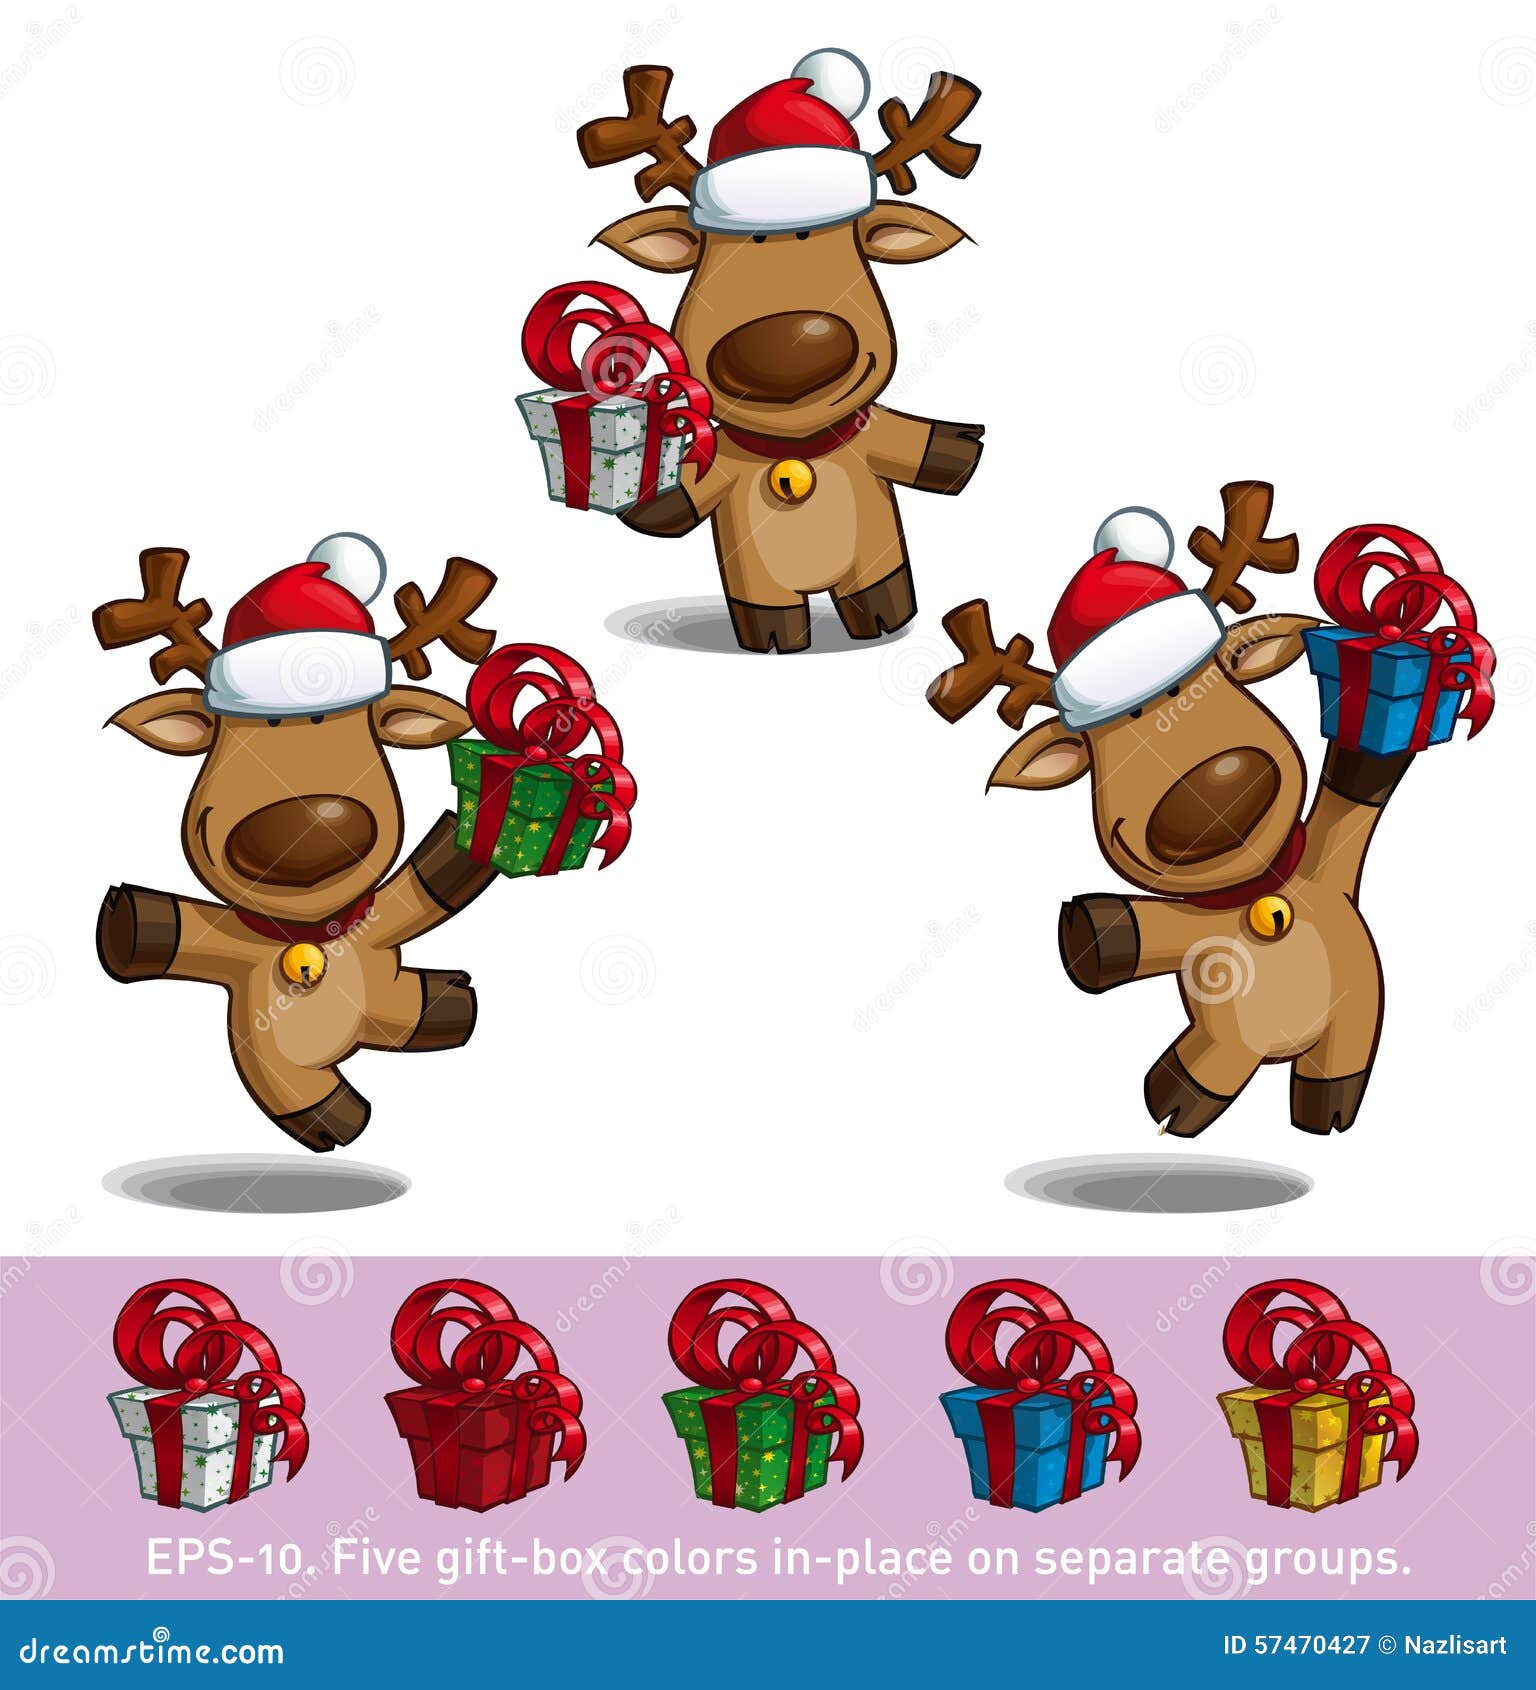 Elks Holding a Gift. Set of three cartoon illustrations of a Santa s elk holding a gift in three poses-themes. Each pose on separate layer. All gift colors are in-place in separate groups for all poses.